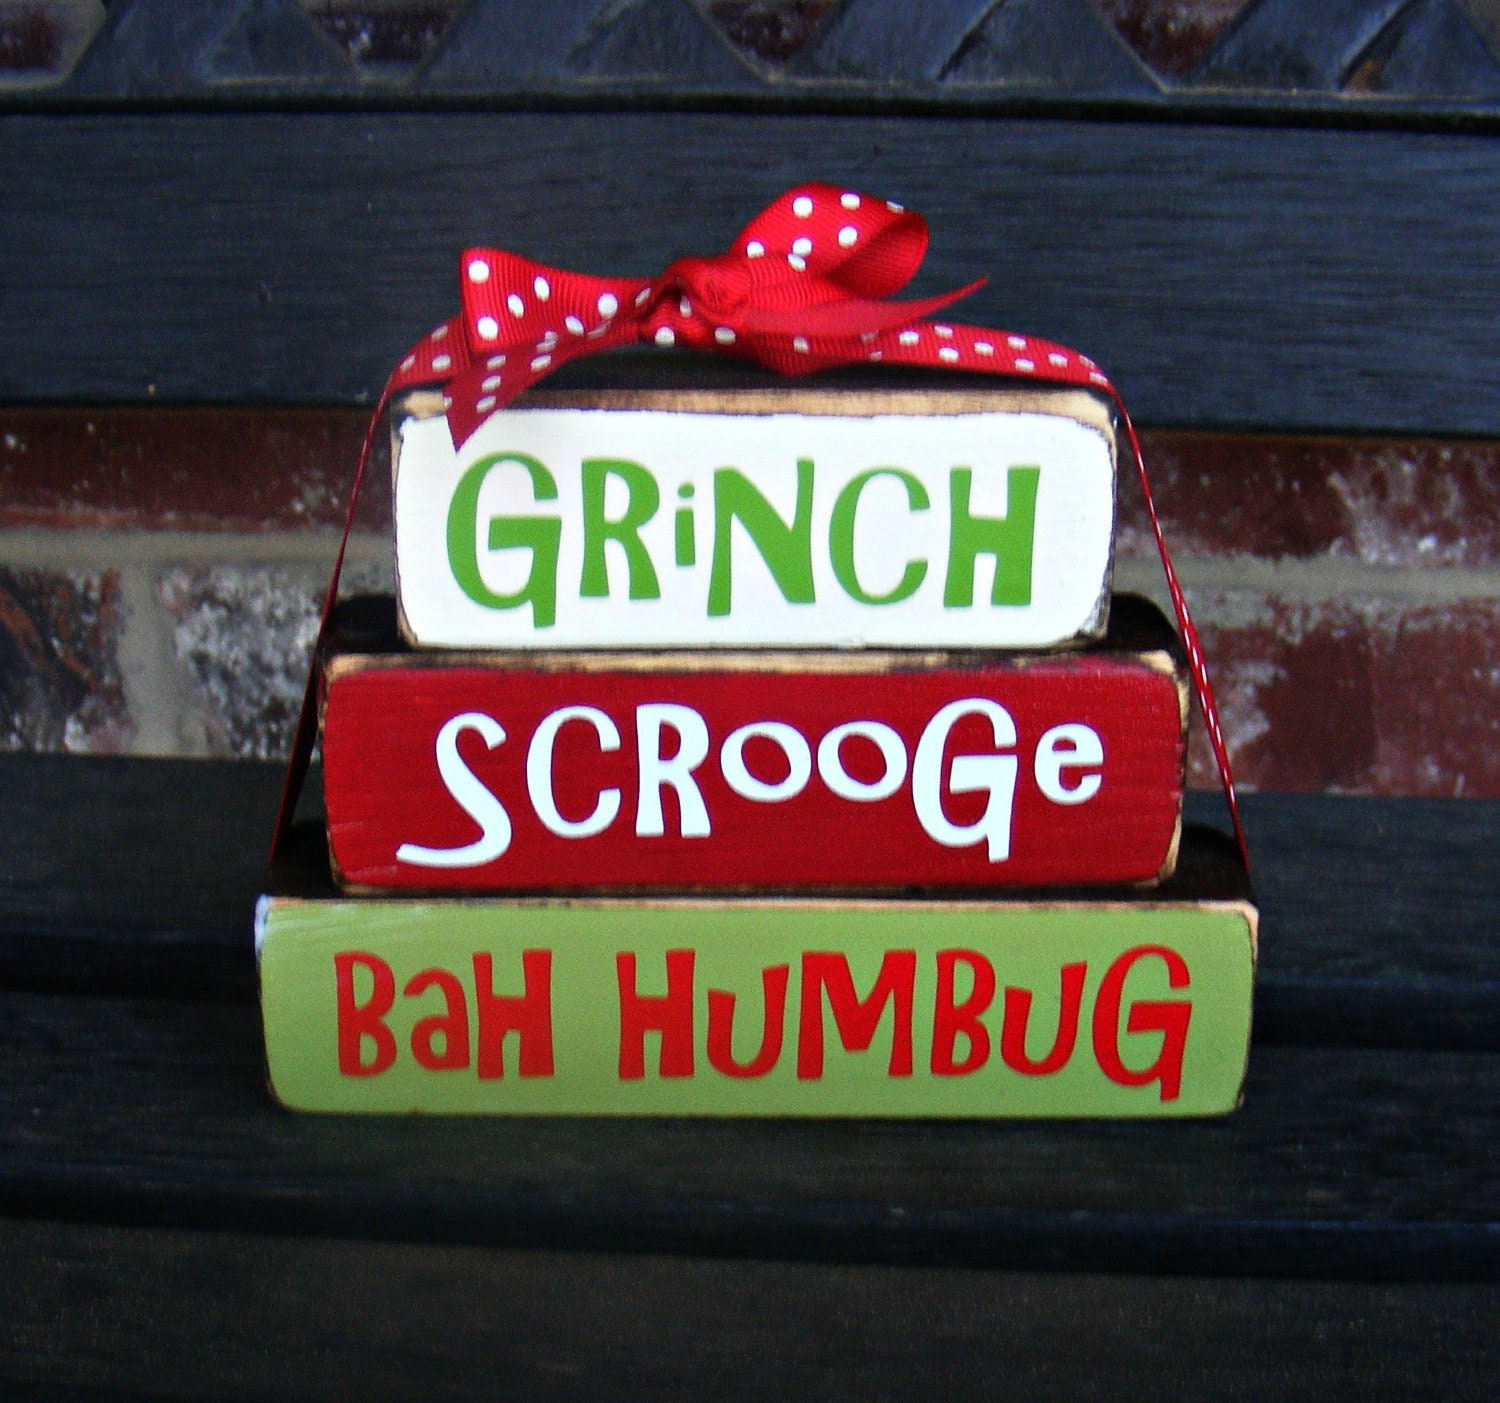 Christmas wood blocks-Grinch stacker blocks-part of the "Grinch" collection